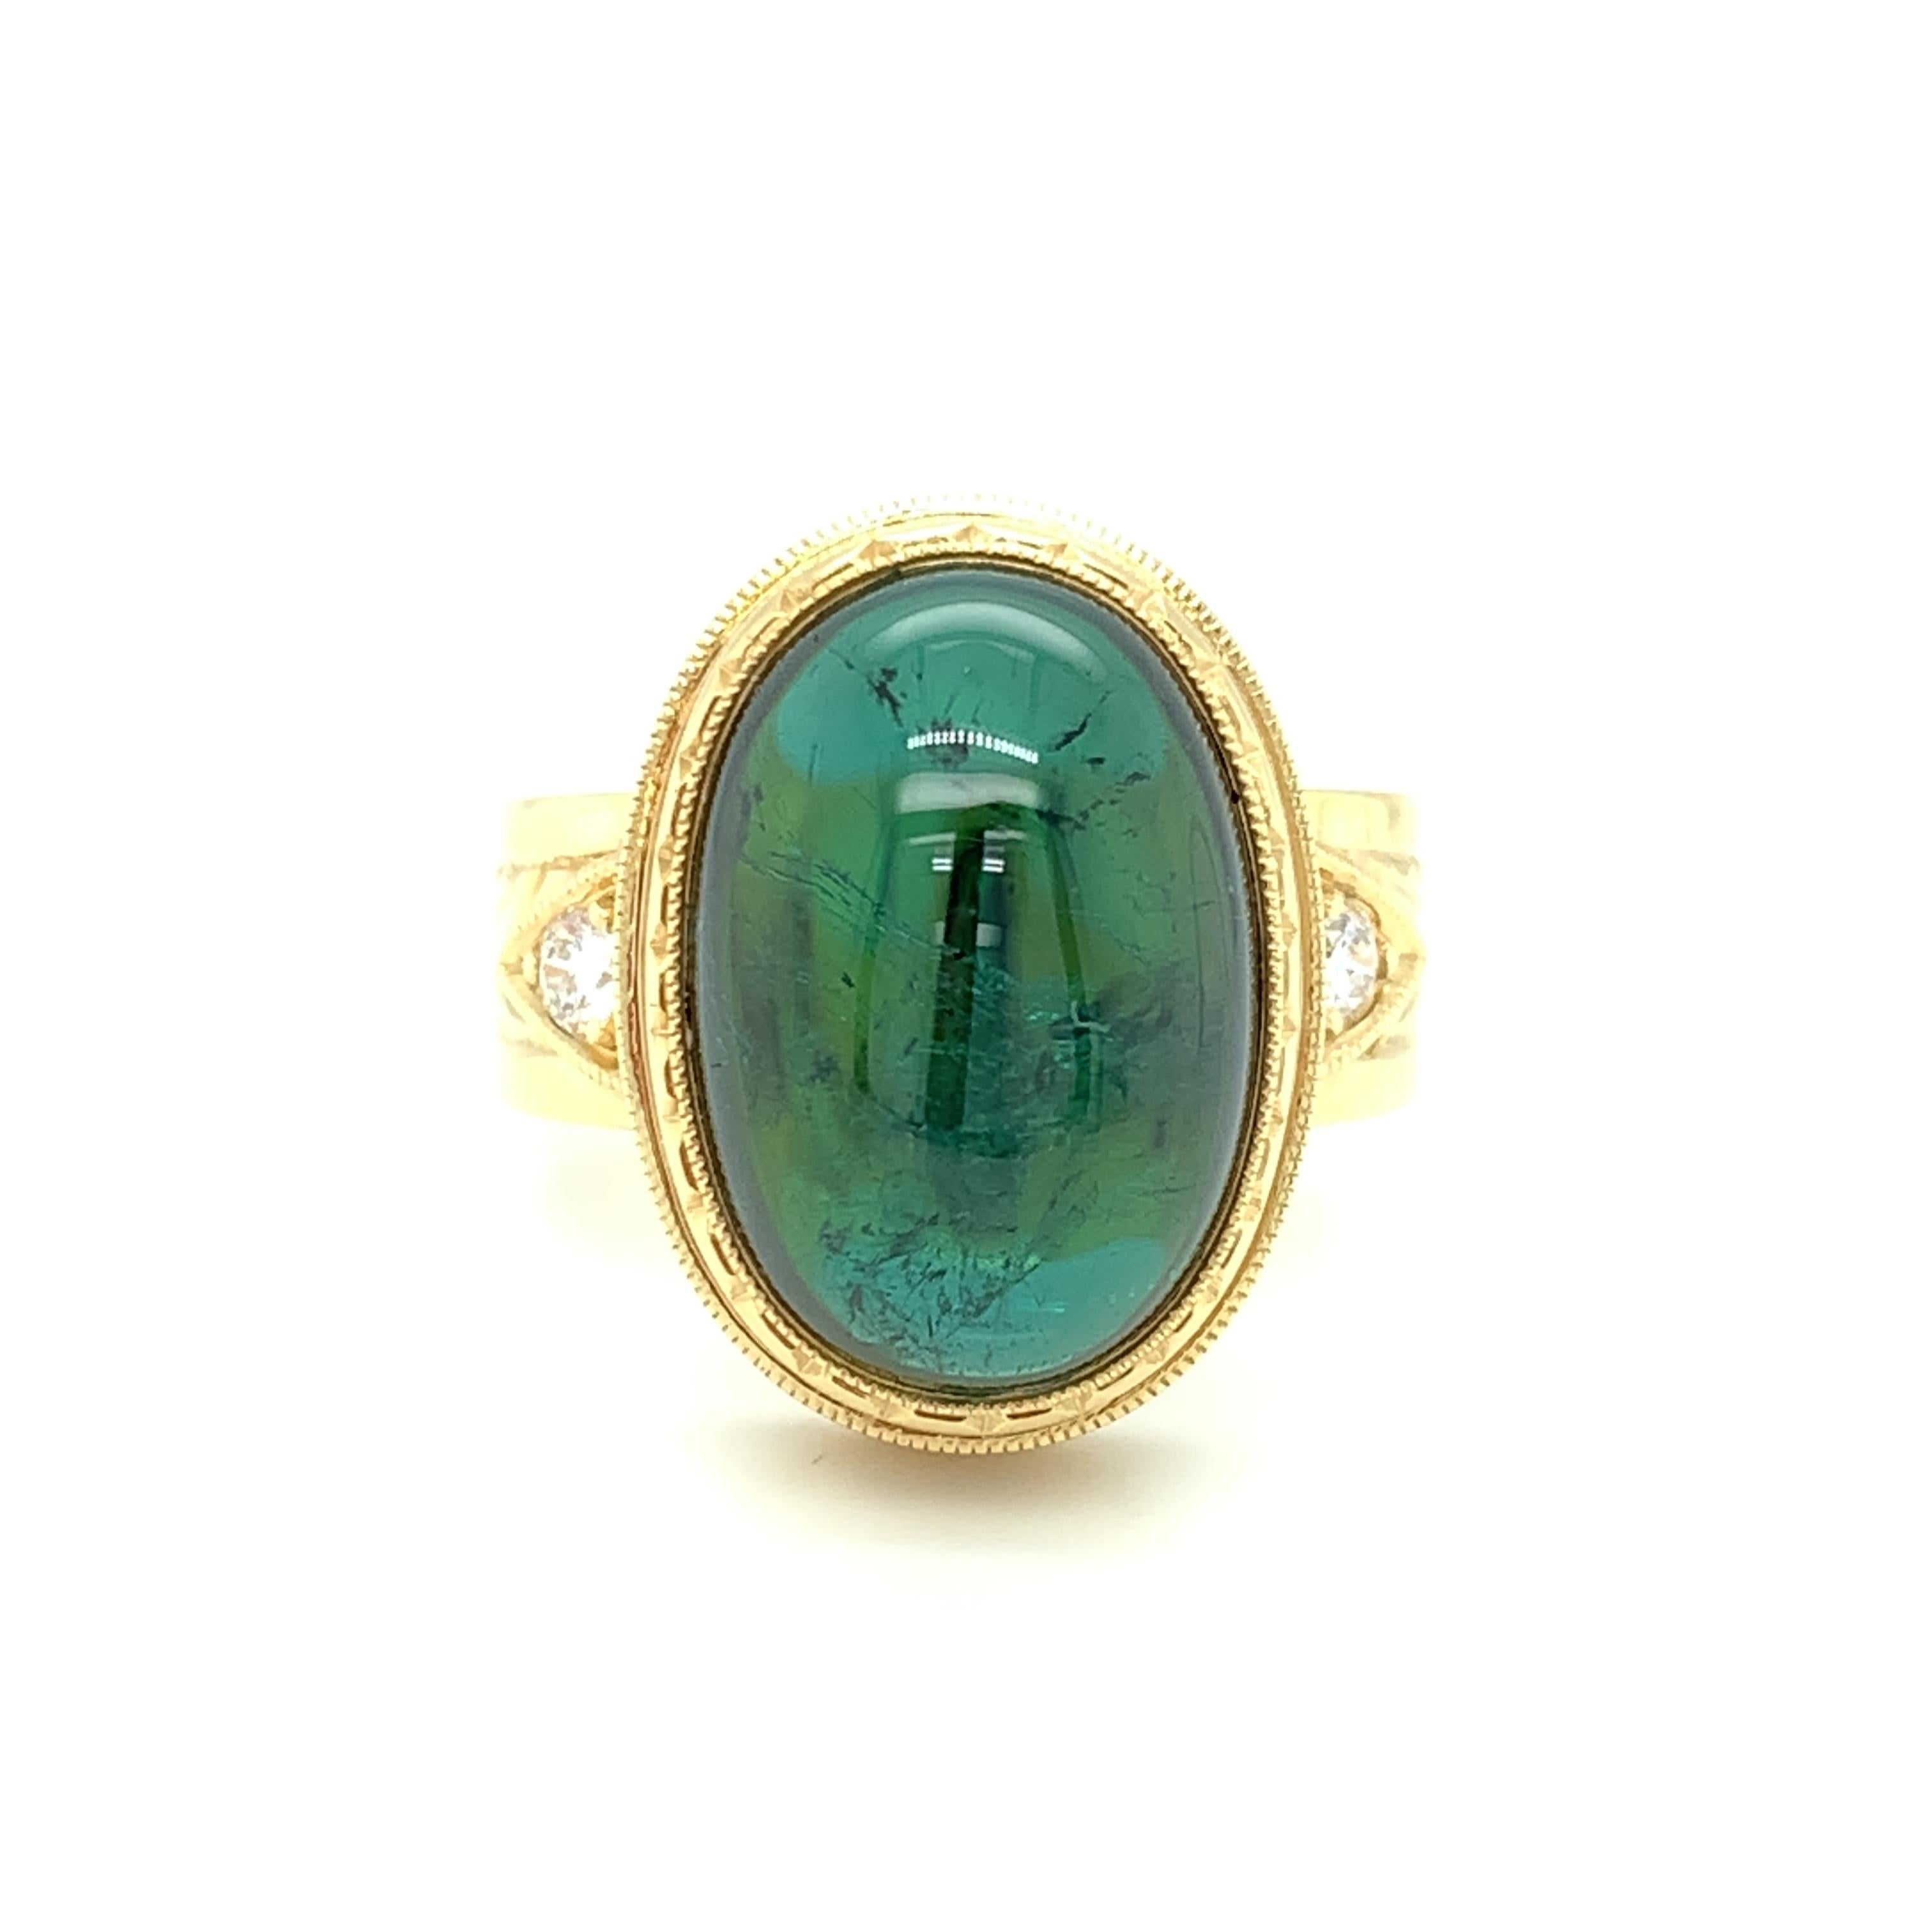 A large, rich 14.01 carat teal green tourmaline cabochon is the focal point of this custom-made signature ring, specially designed for this lovely gem. The tourmaline cabochon is bezel set by hand with a level of precision and skill seldom seen